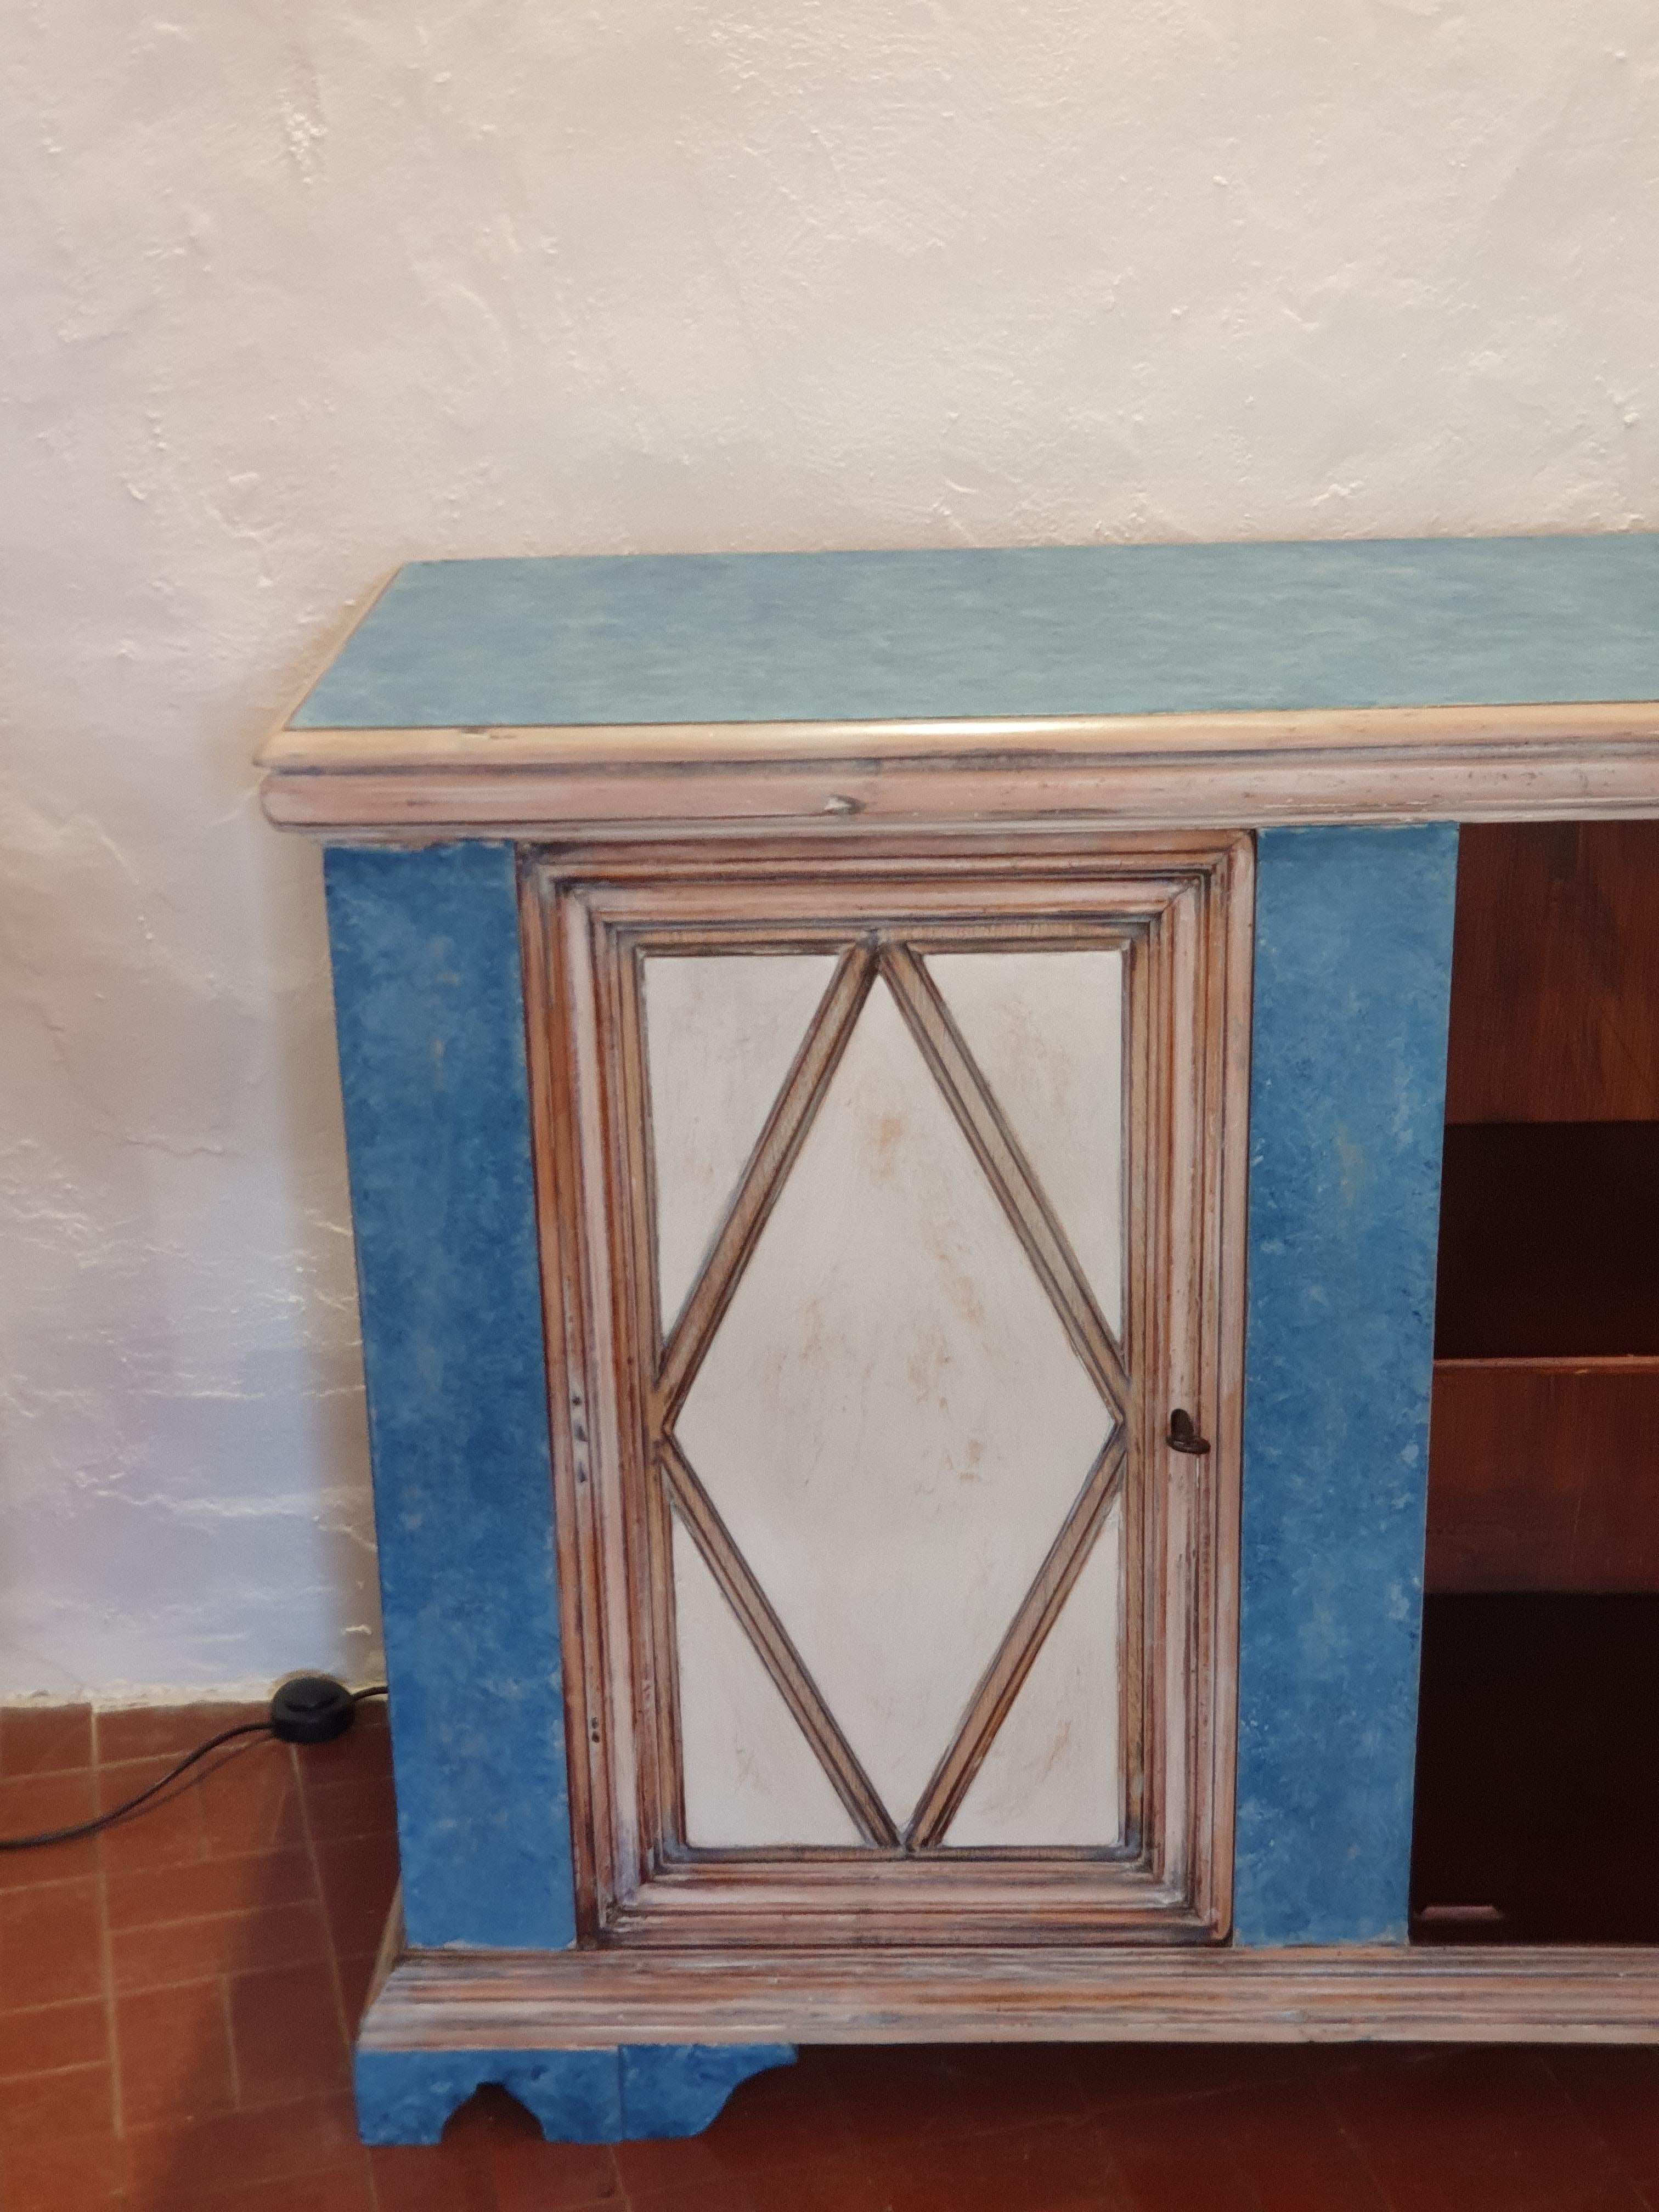 An elegant vintage Italian hand-painted wooden buffet cabinet , in pale blue, beige and cream colors. This Italian console cabinet is fitted with two doors. Each door has a stylized diamond carving typical of 18th century Italian beliefs . The doors